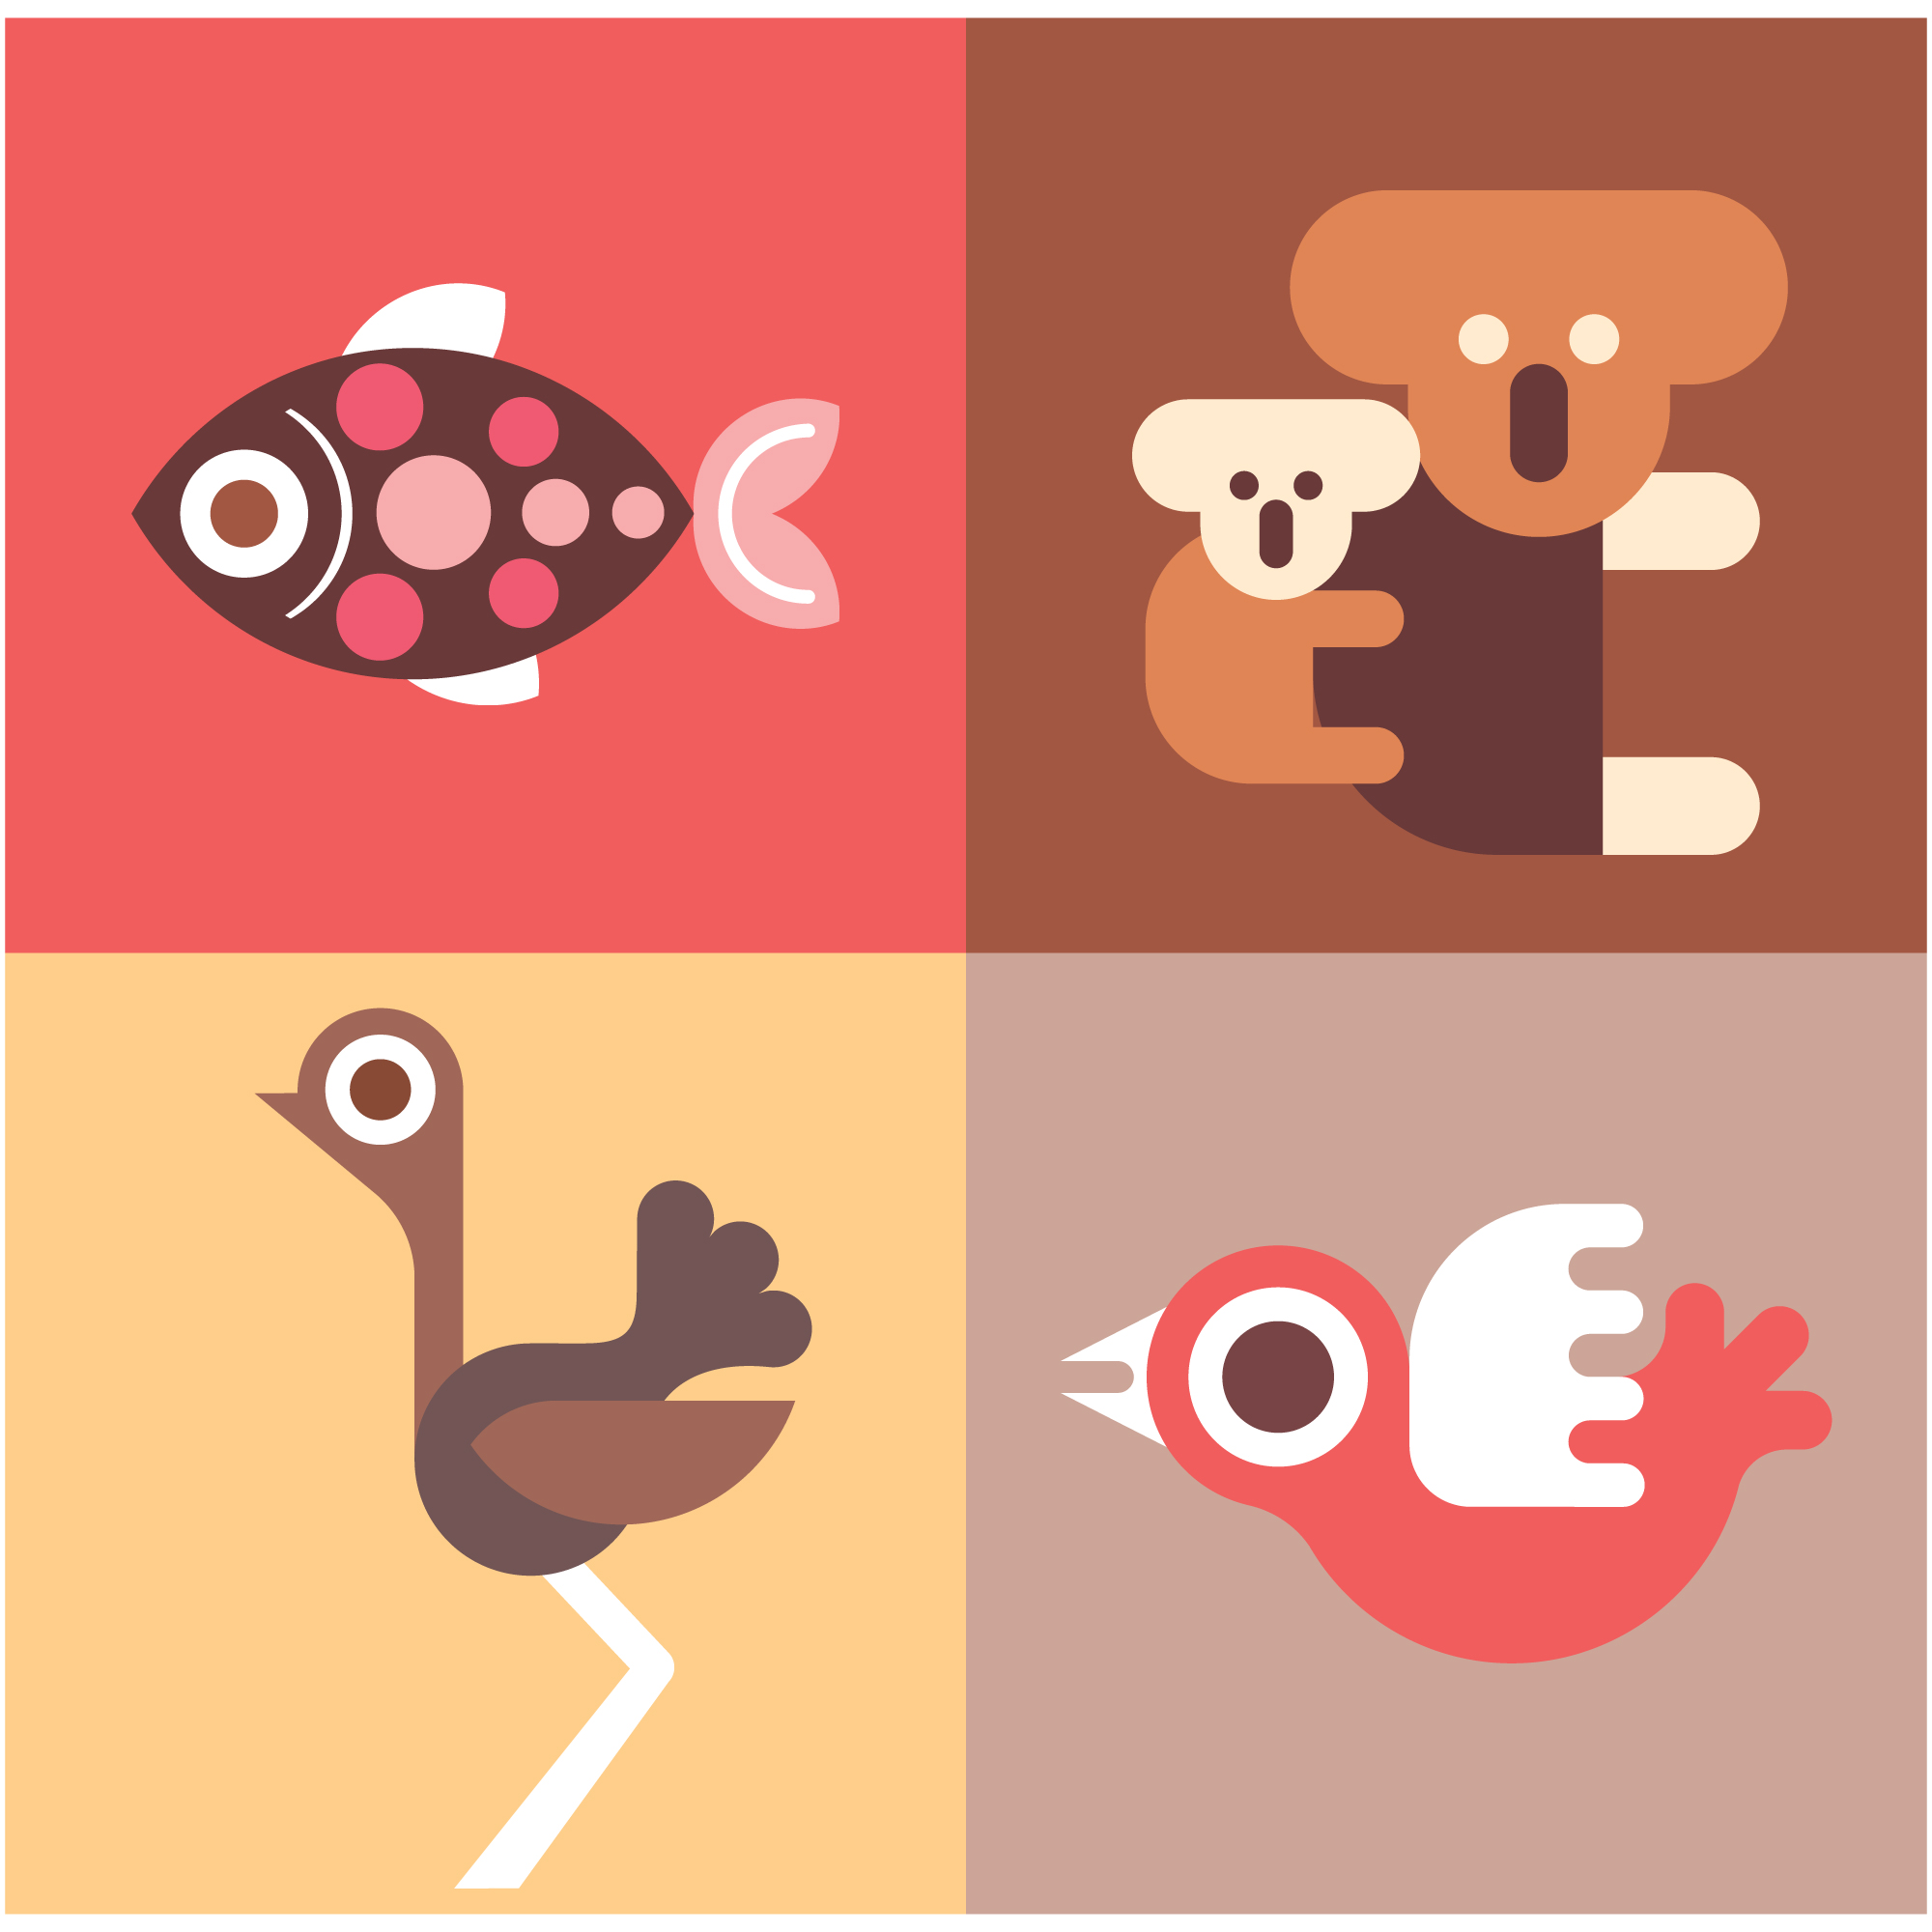 Four different types of animals on different colored squares.